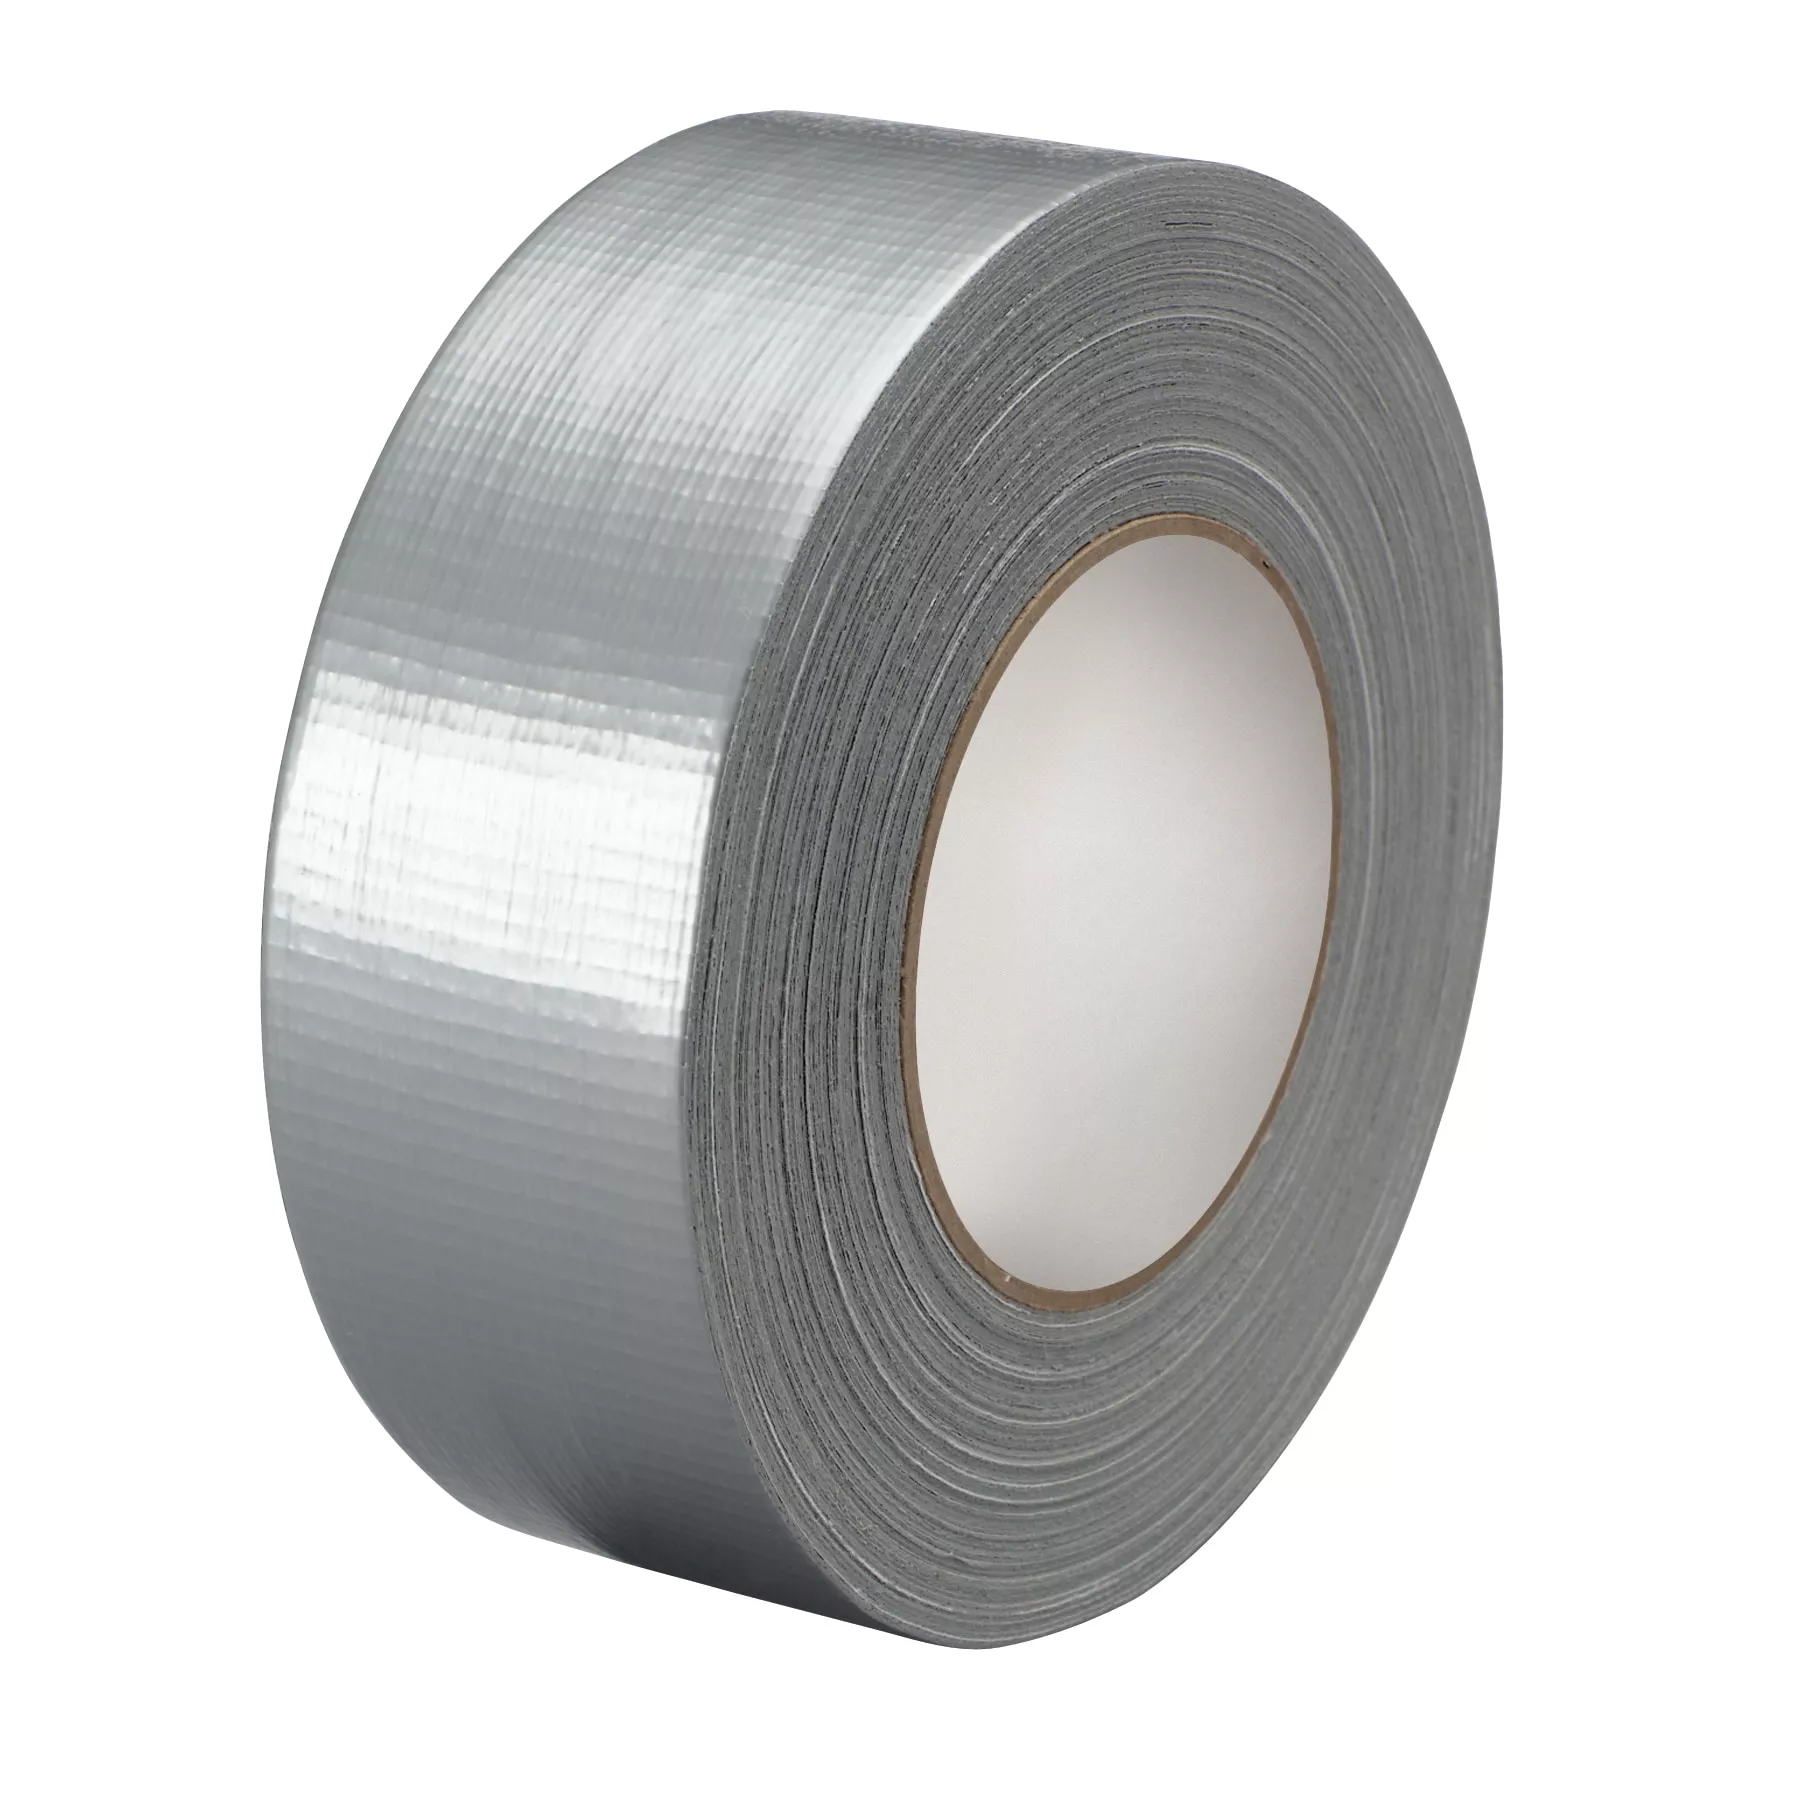 3M™ Multi-Purpose Duct Tape 3900, Silver, 48 mm x 54.8 m, 7.6 mil, 24
Roll/Case, Individually Wrapped Conveniently Packaged